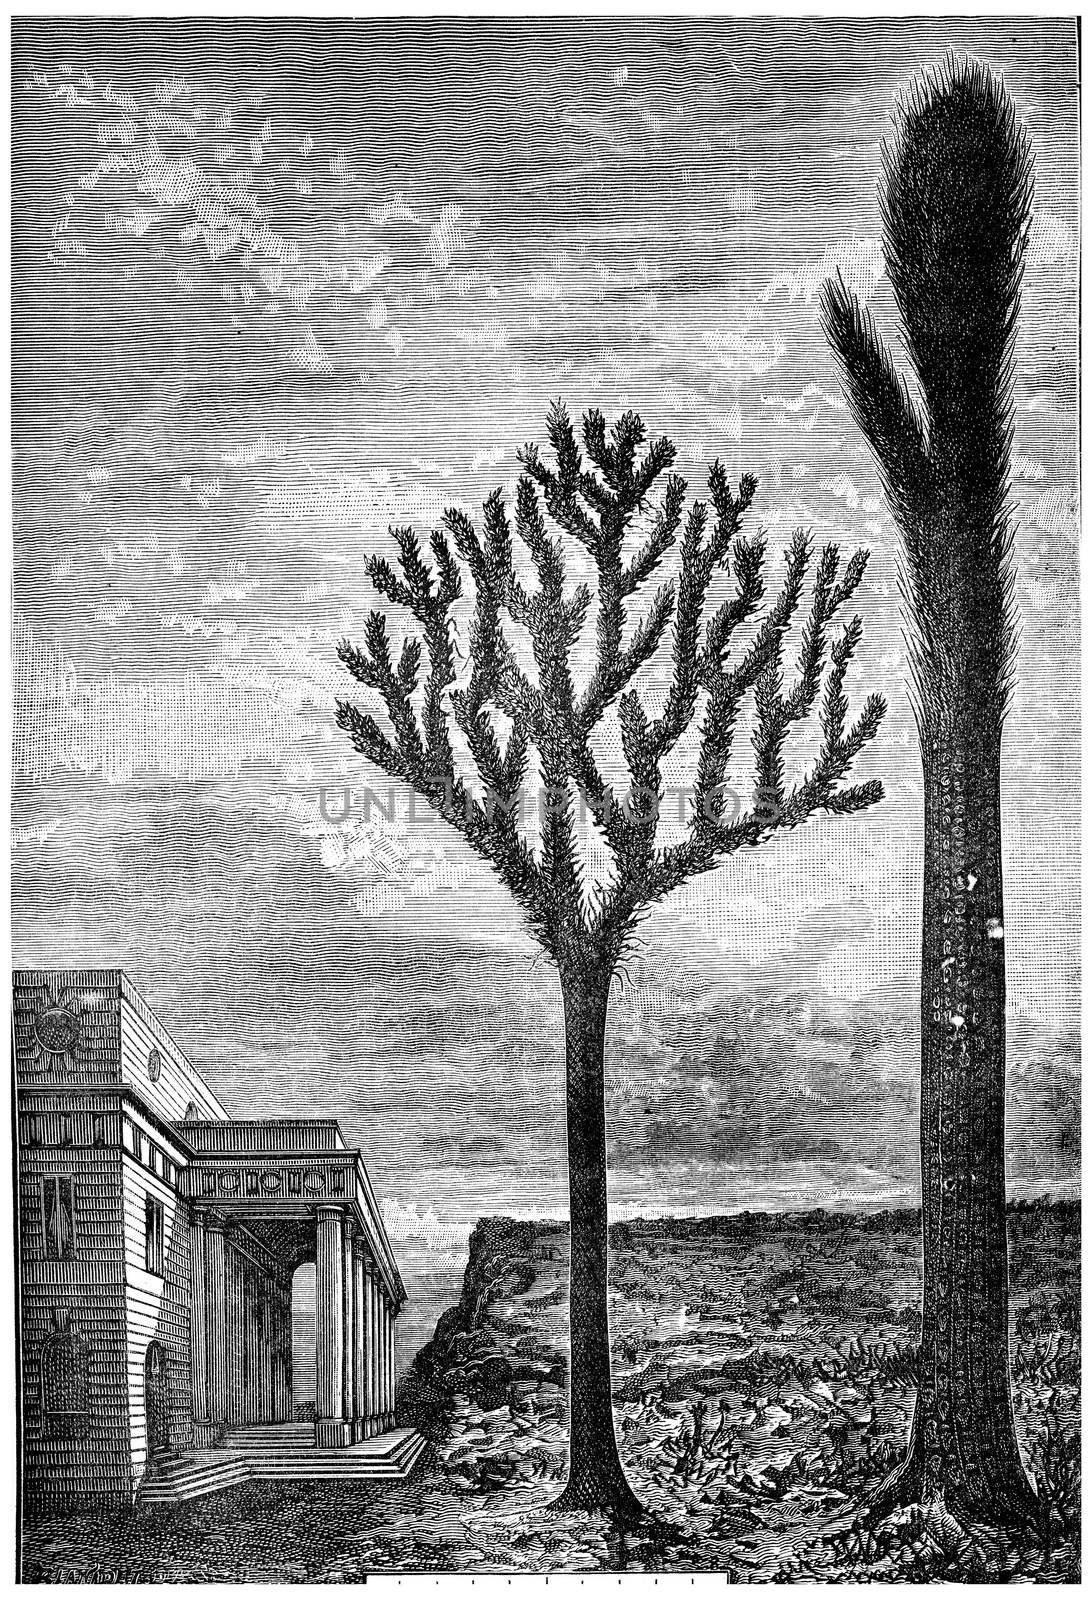 Resurrected today, these giant trees will make a strange figure, vintage engraved illustration. Earth before man – 1886.